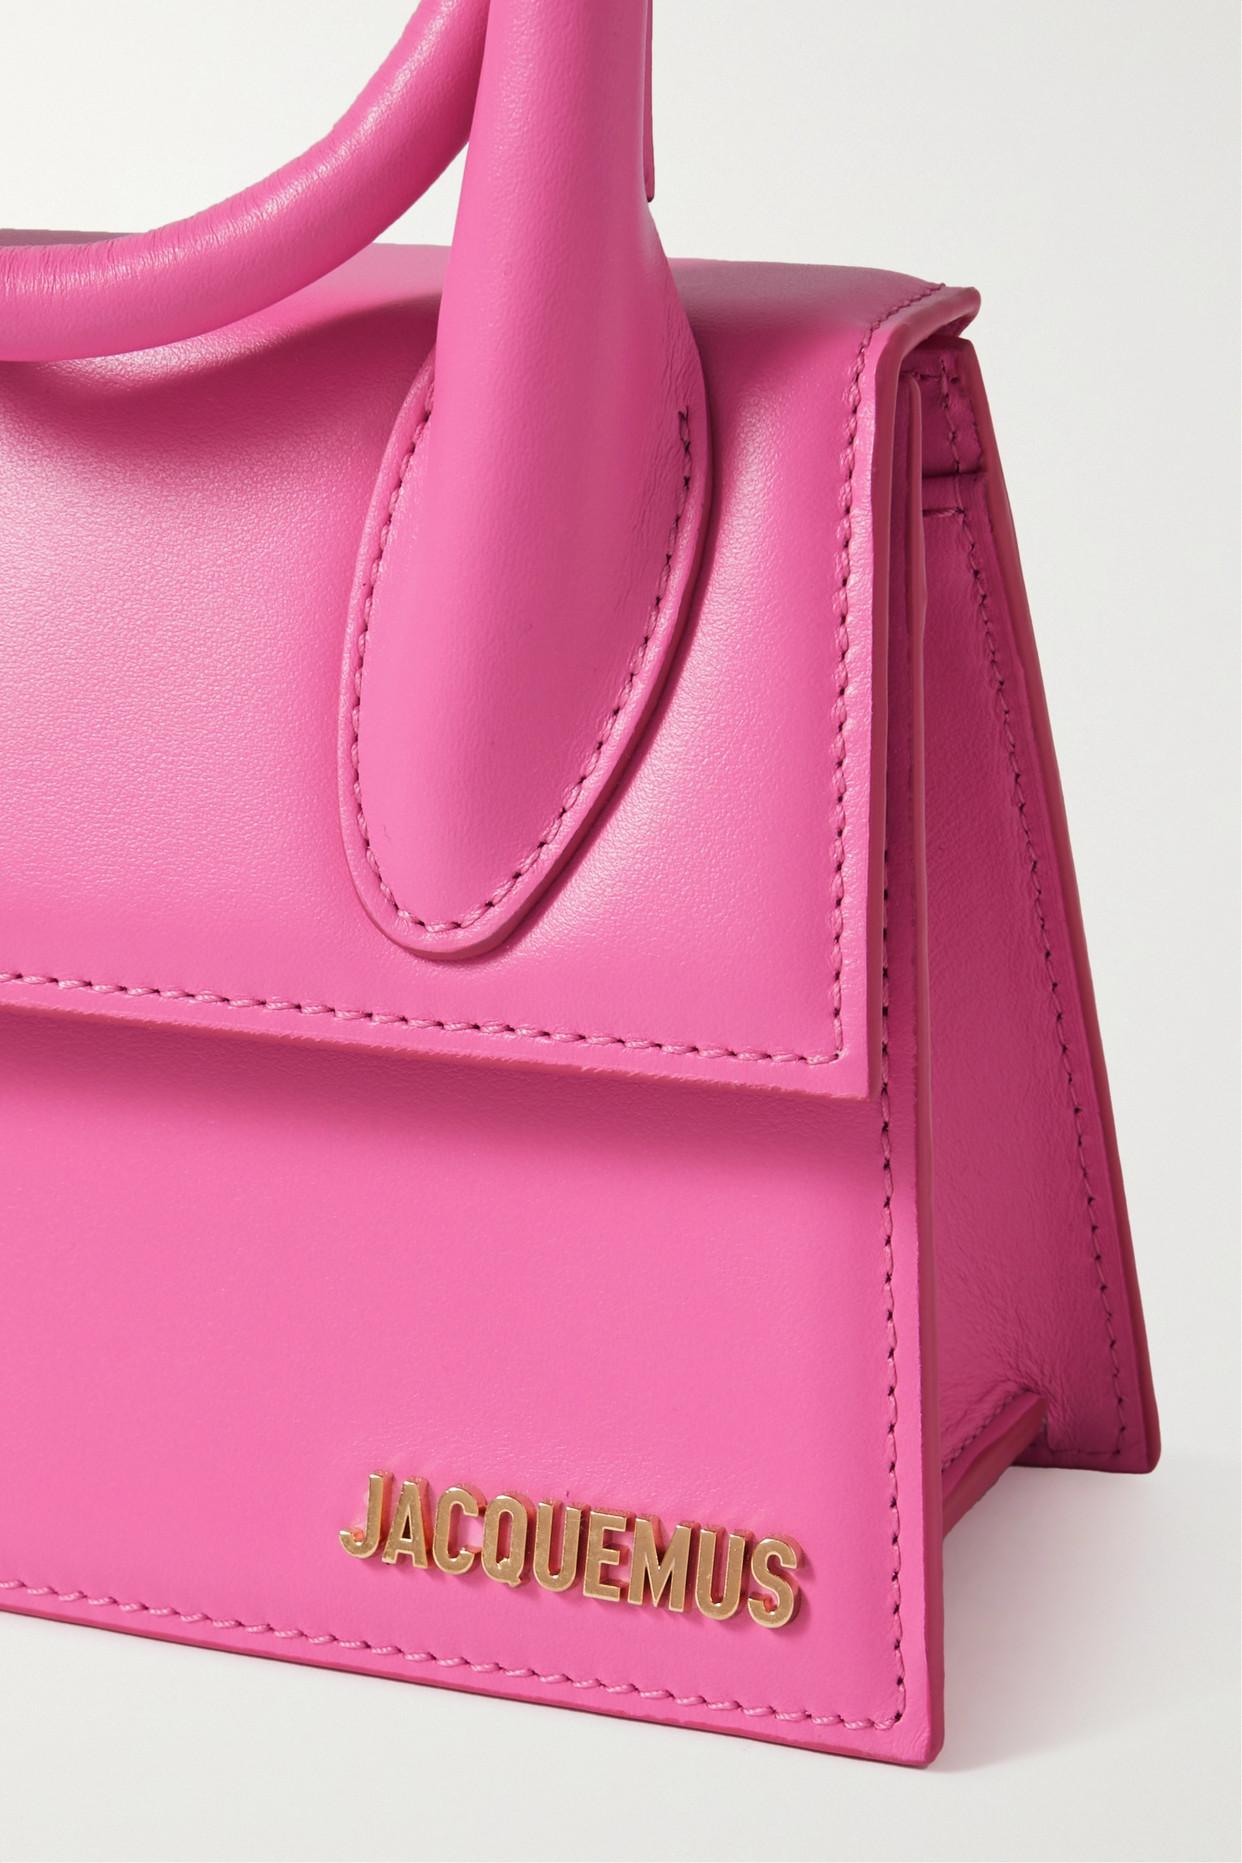 Jacquemus - Le Chiquito Long Leather Tote - Pink - One Size - Net A Porter